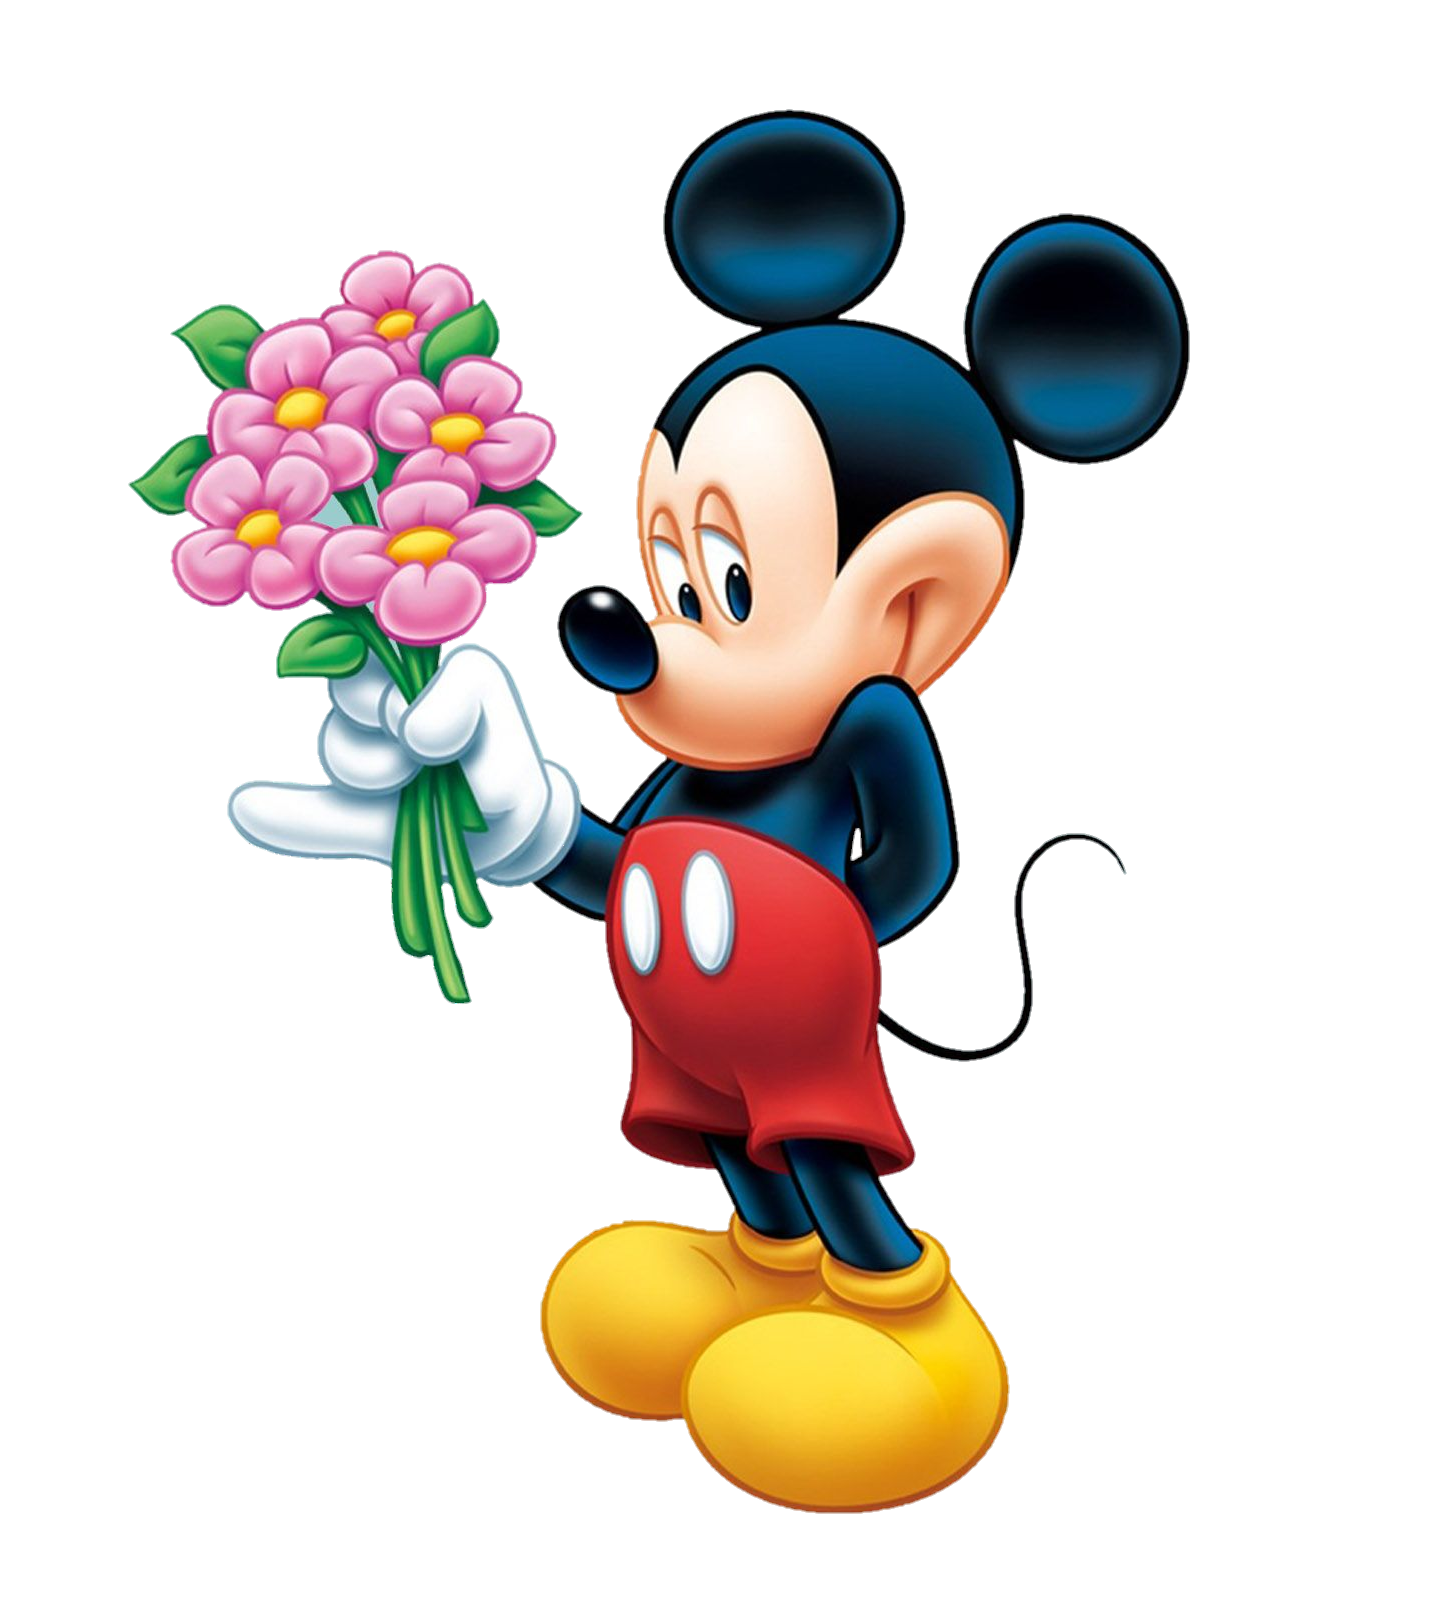 mickey-mouse-png-from-pngfre-2